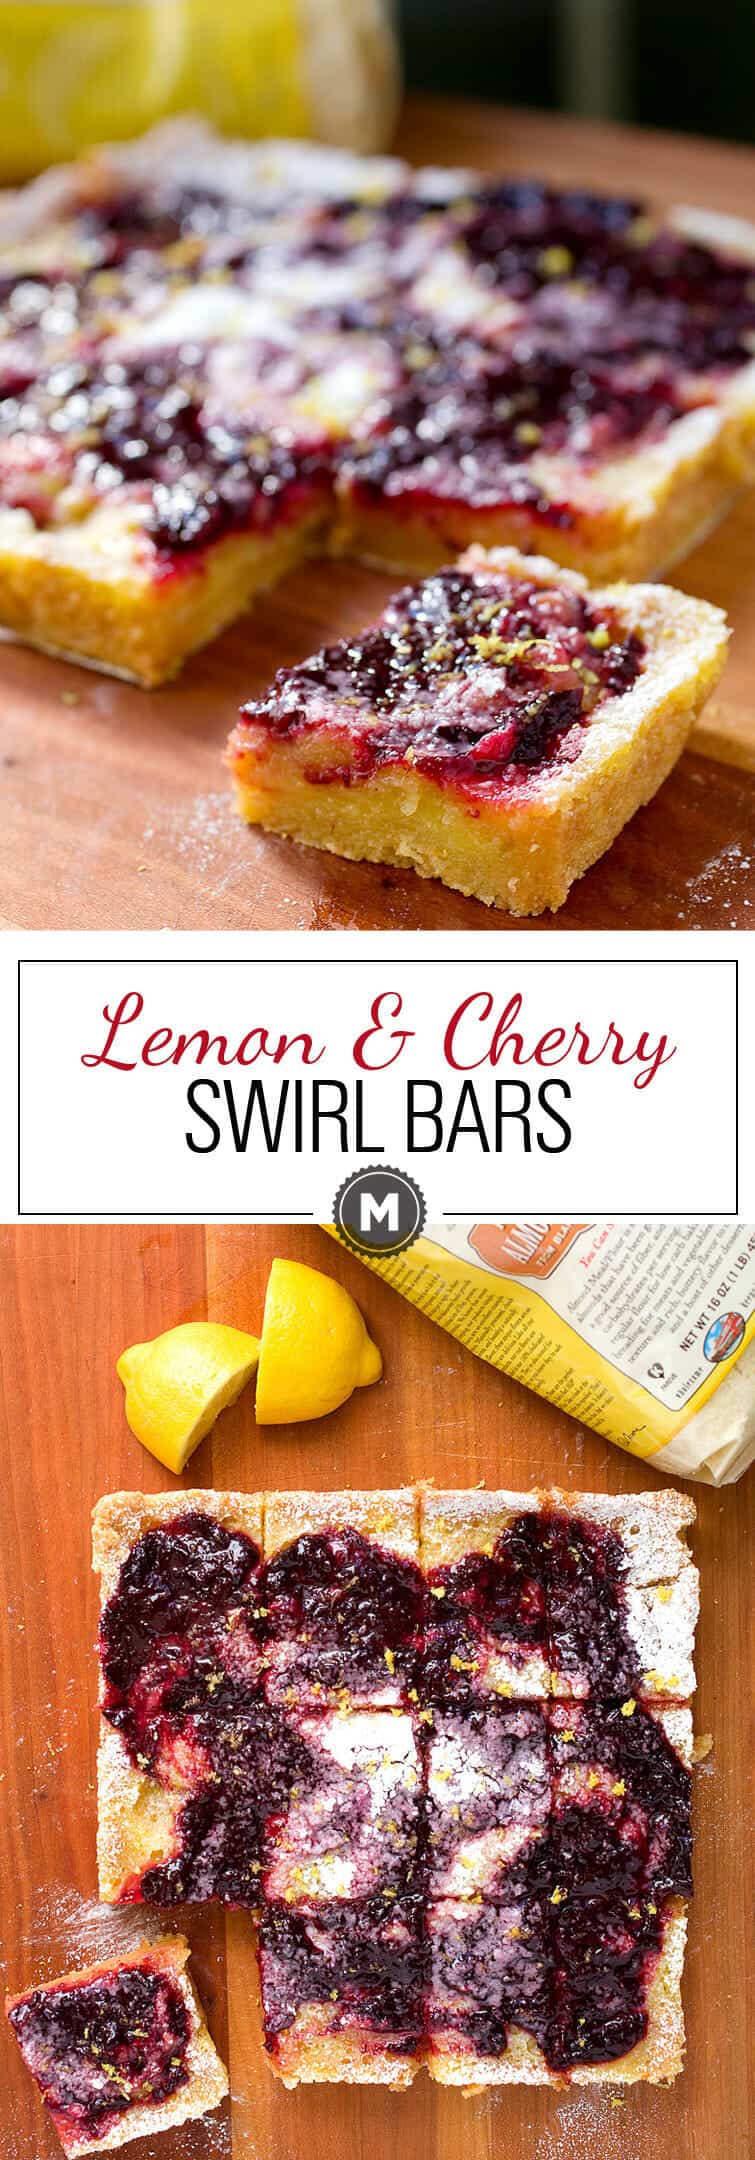 Lemon Cherry Swirl Bars: These simple baked dessert bars are gluten-free and use Bob's Red Mill Almond Flour for the crust! The bars are bright, fruity, tangy, and so very addictive. The recipe uses real lemons and cherries! #spons | macheesmo.com